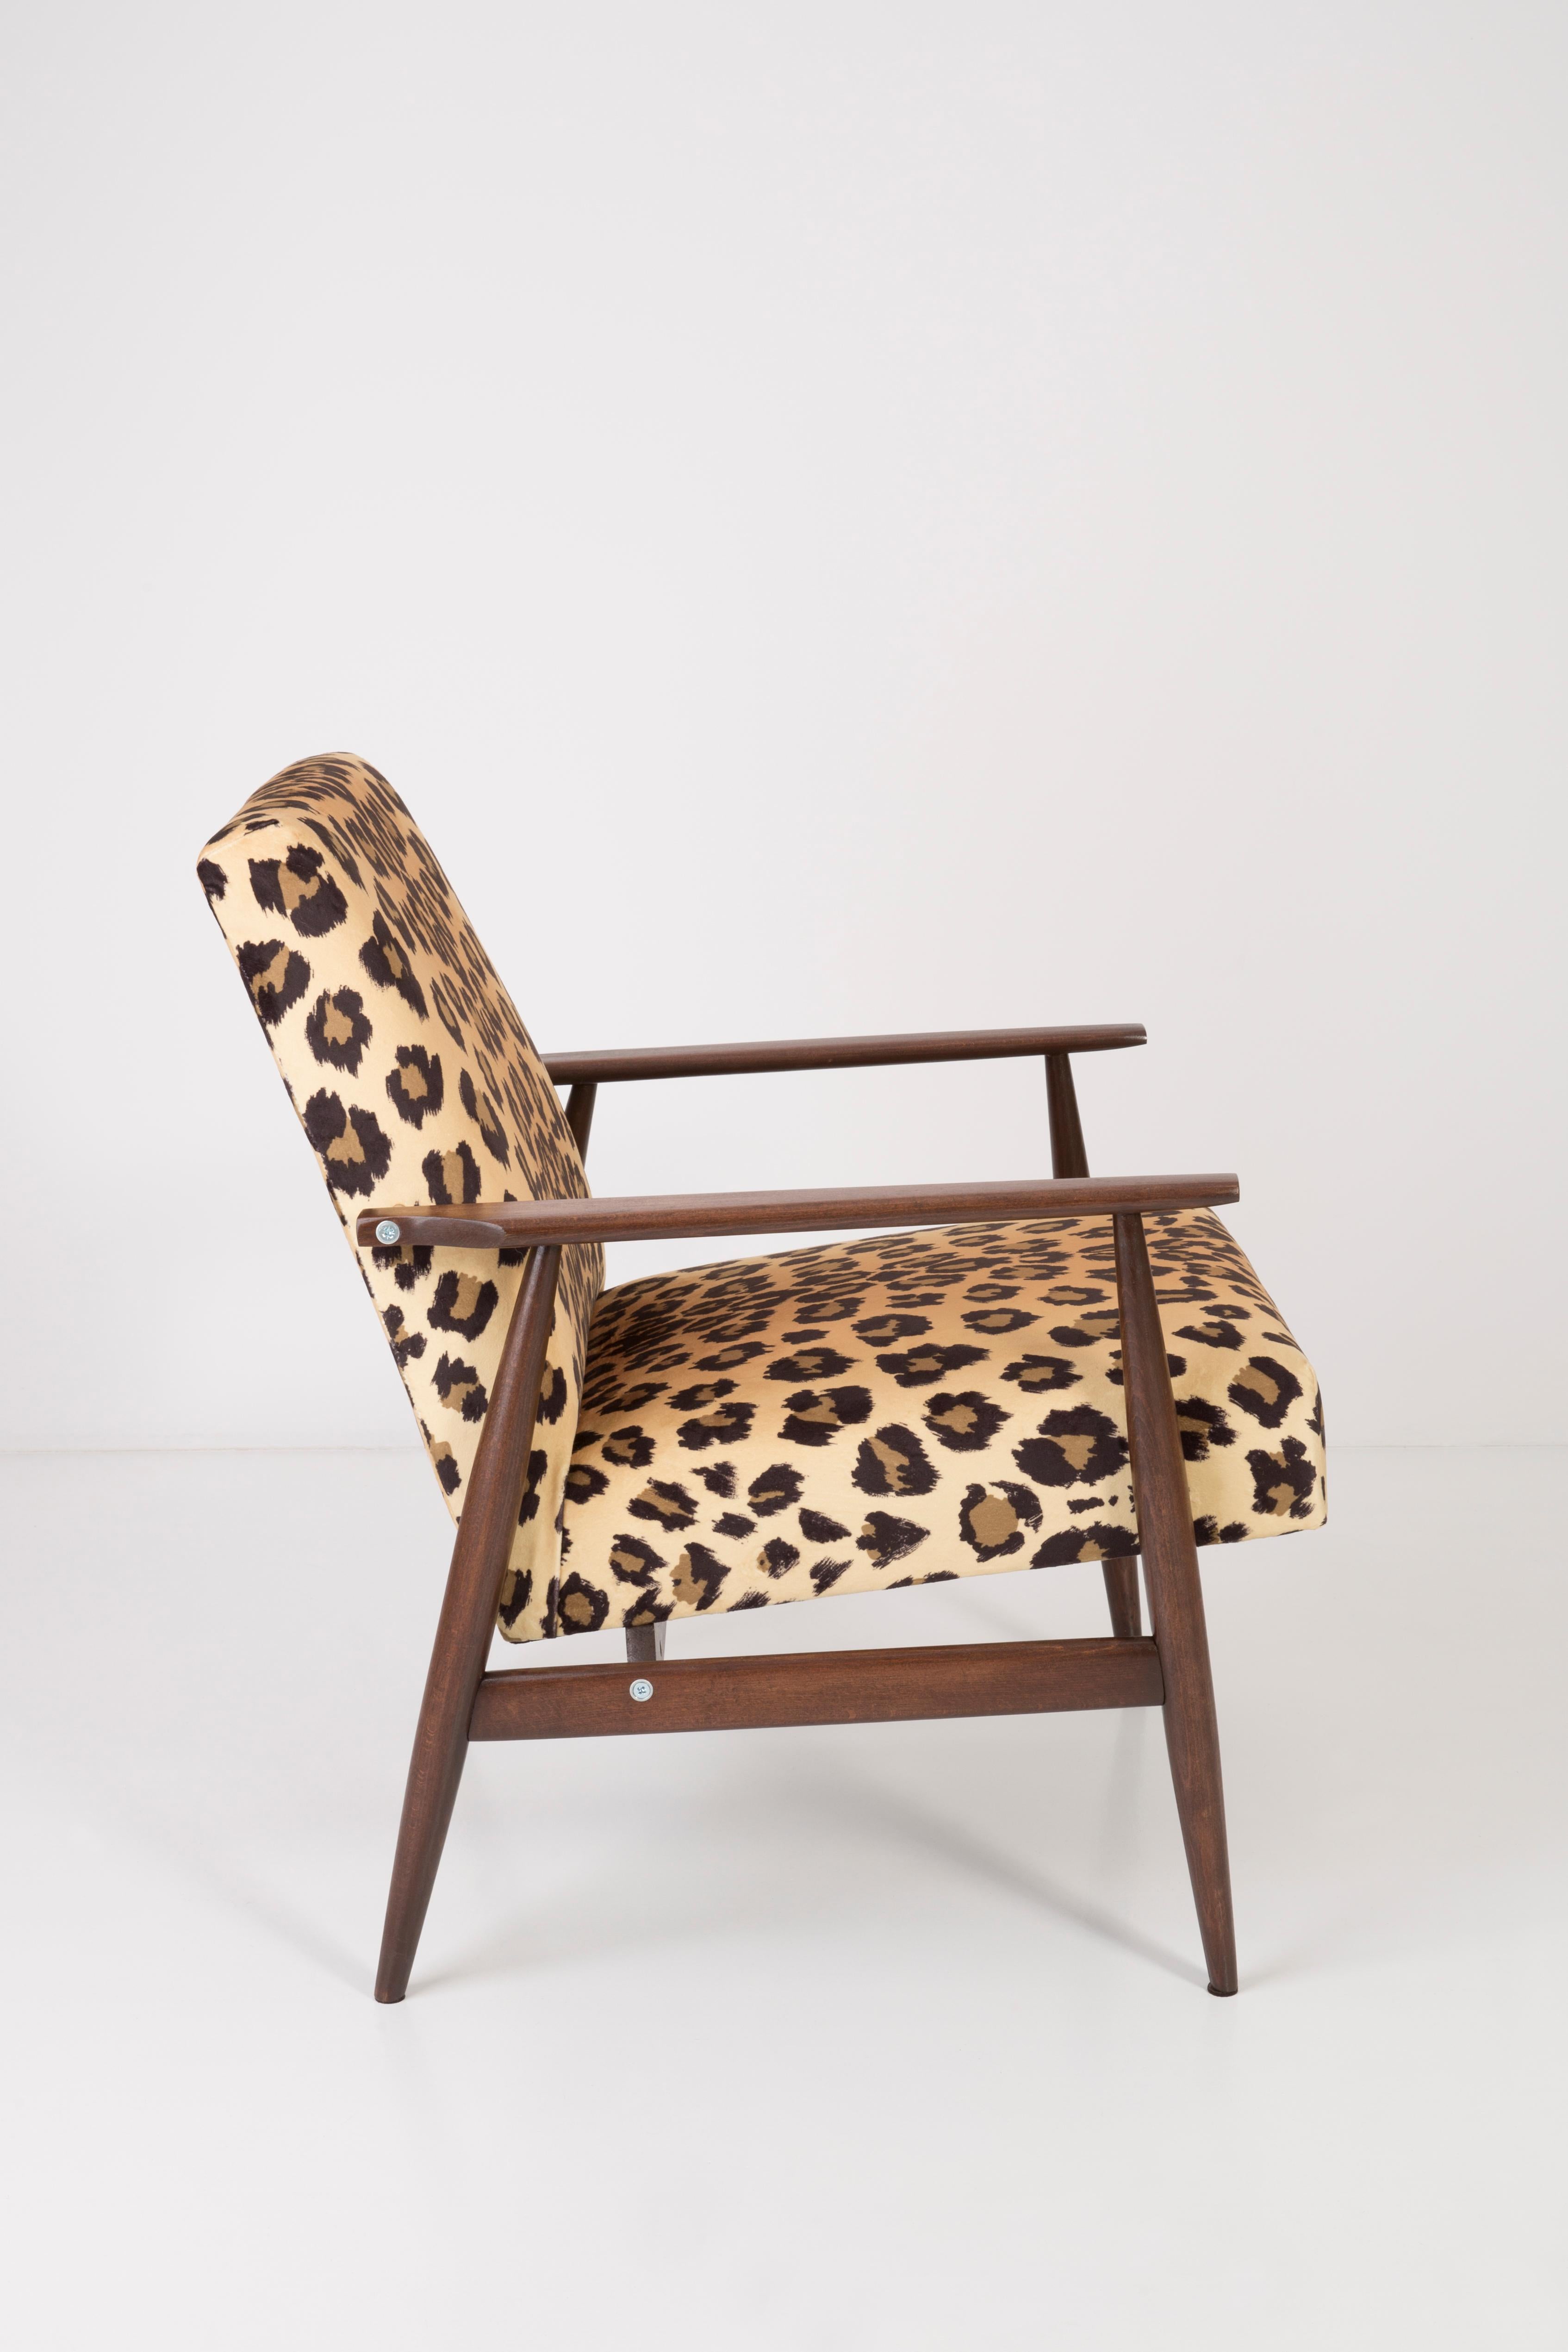 Hand-Crafted Set of Two Midcentury Leopard Print Velvet Dante Armchairs, H. Lis, 1960s For Sale